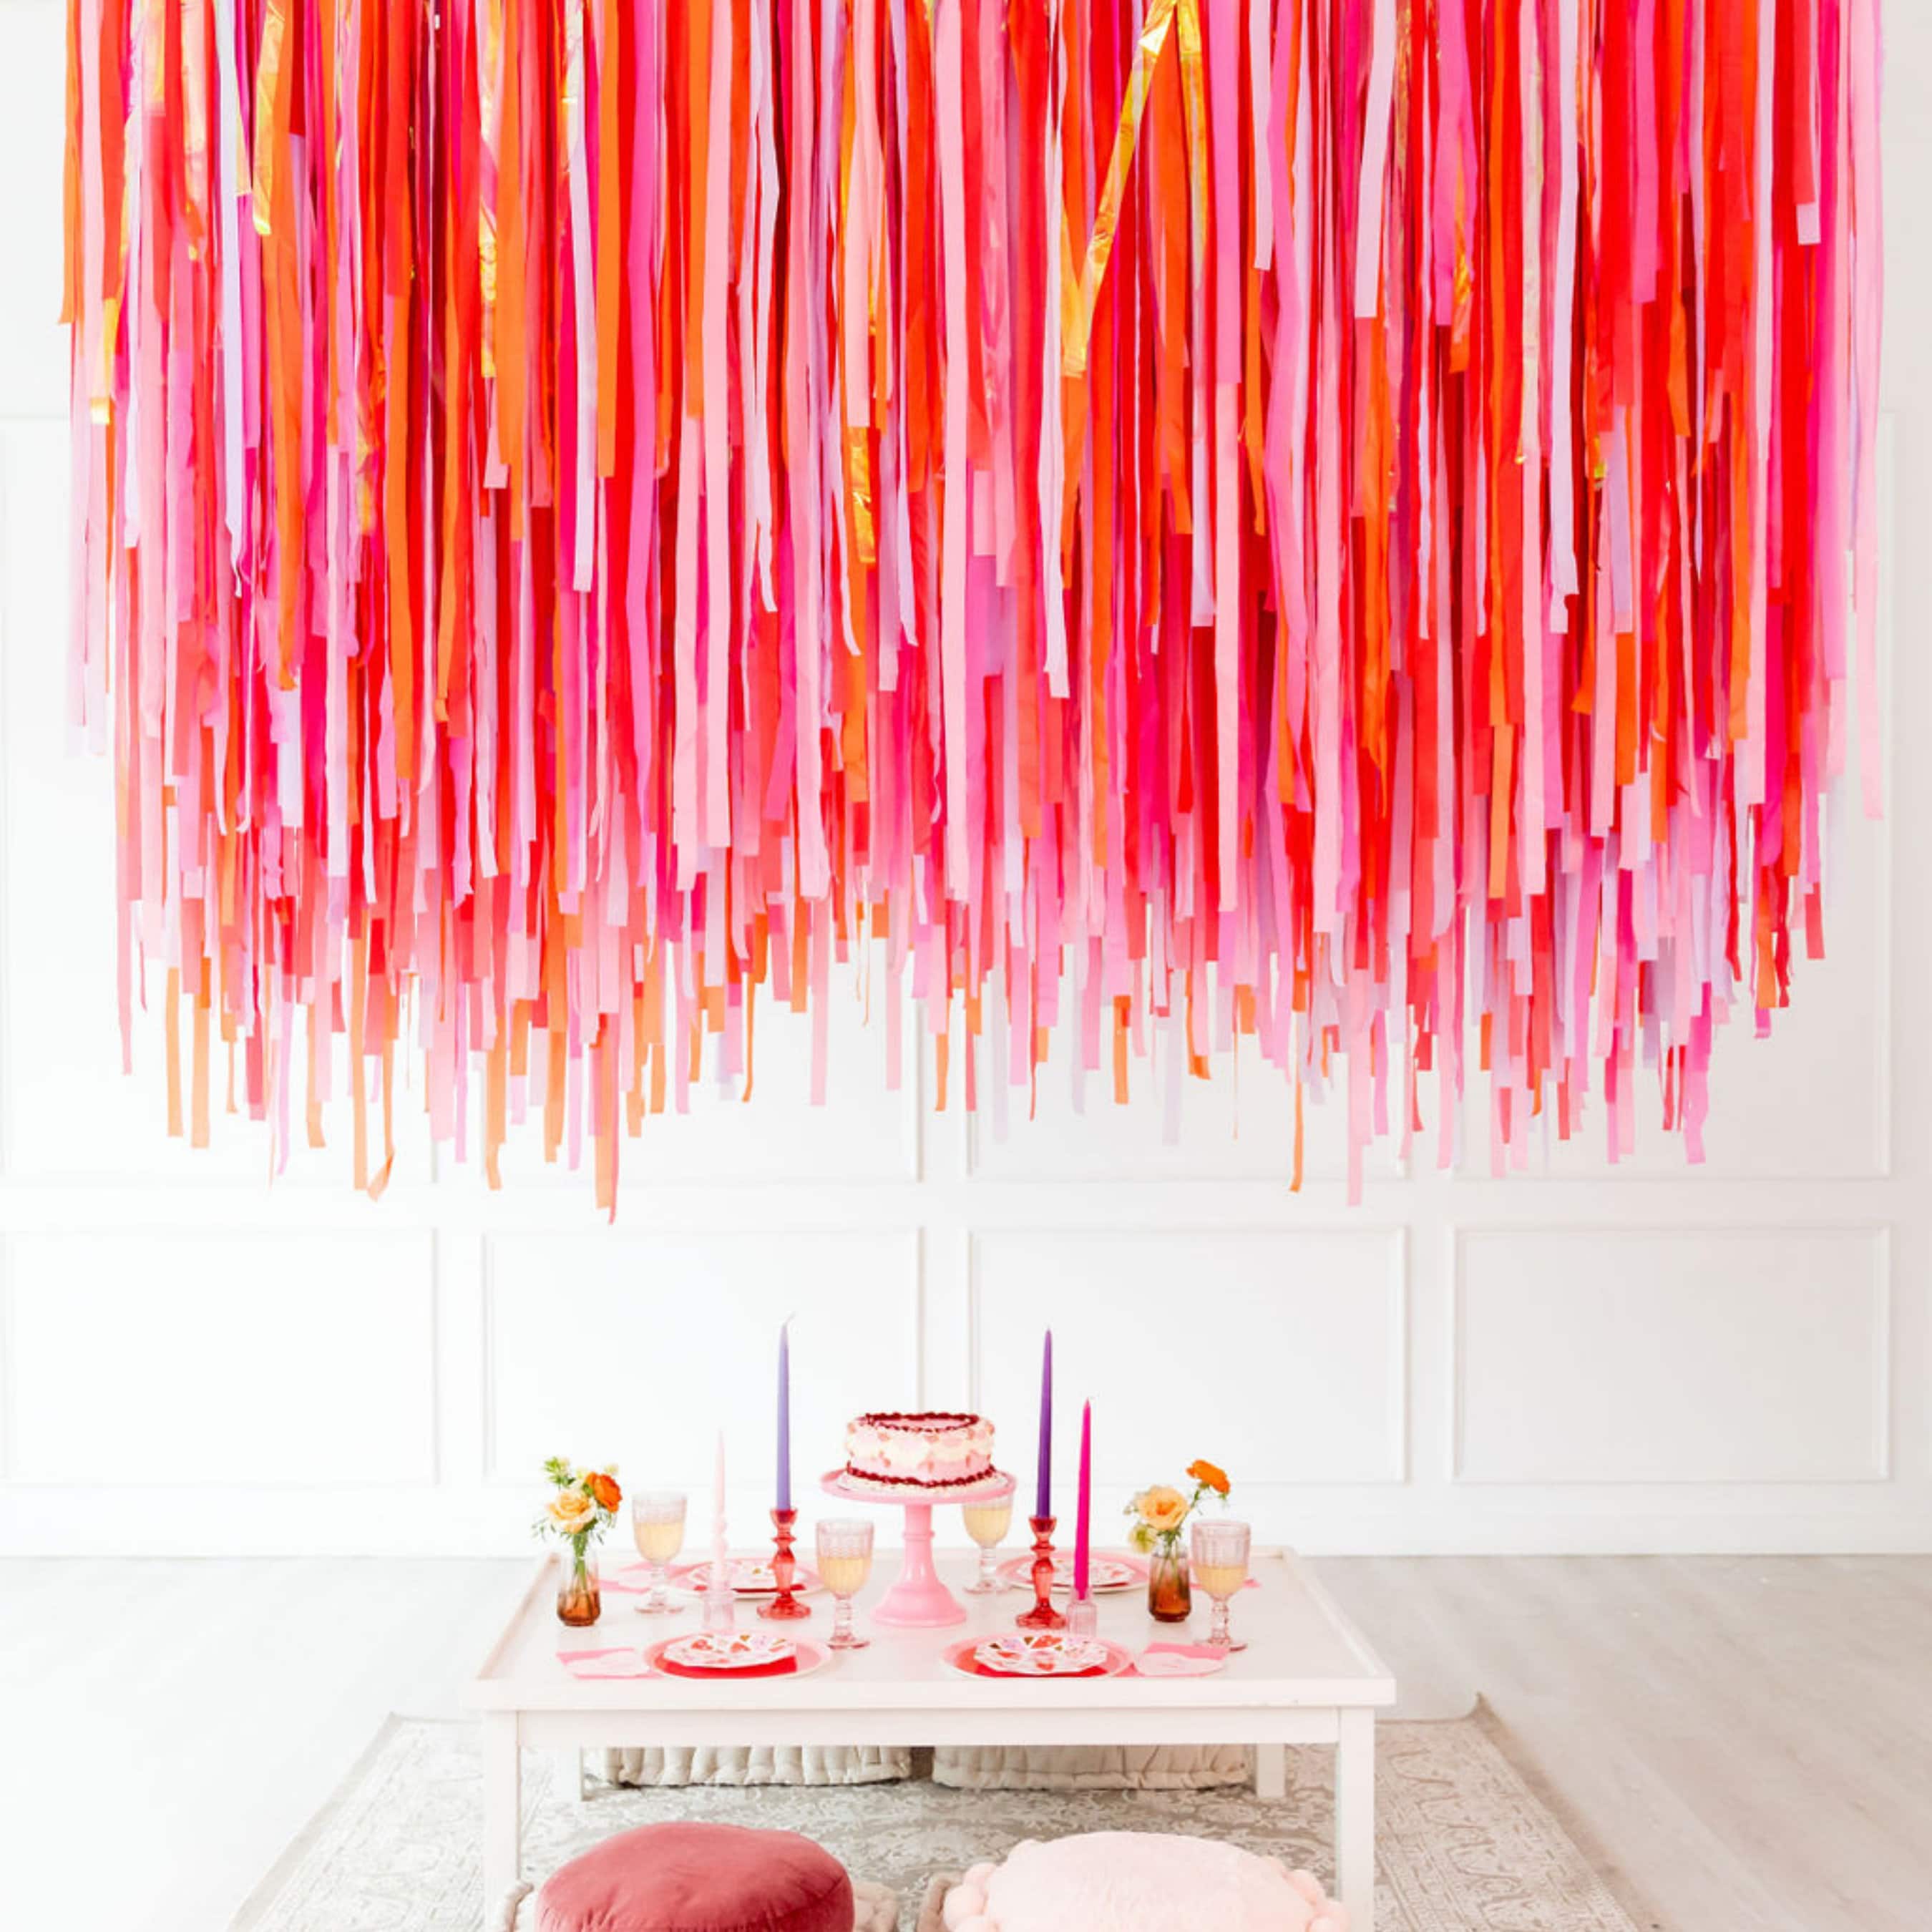 Run two pieces of string across the ceiling and hang streamers (streamers  tied to one, and colle…